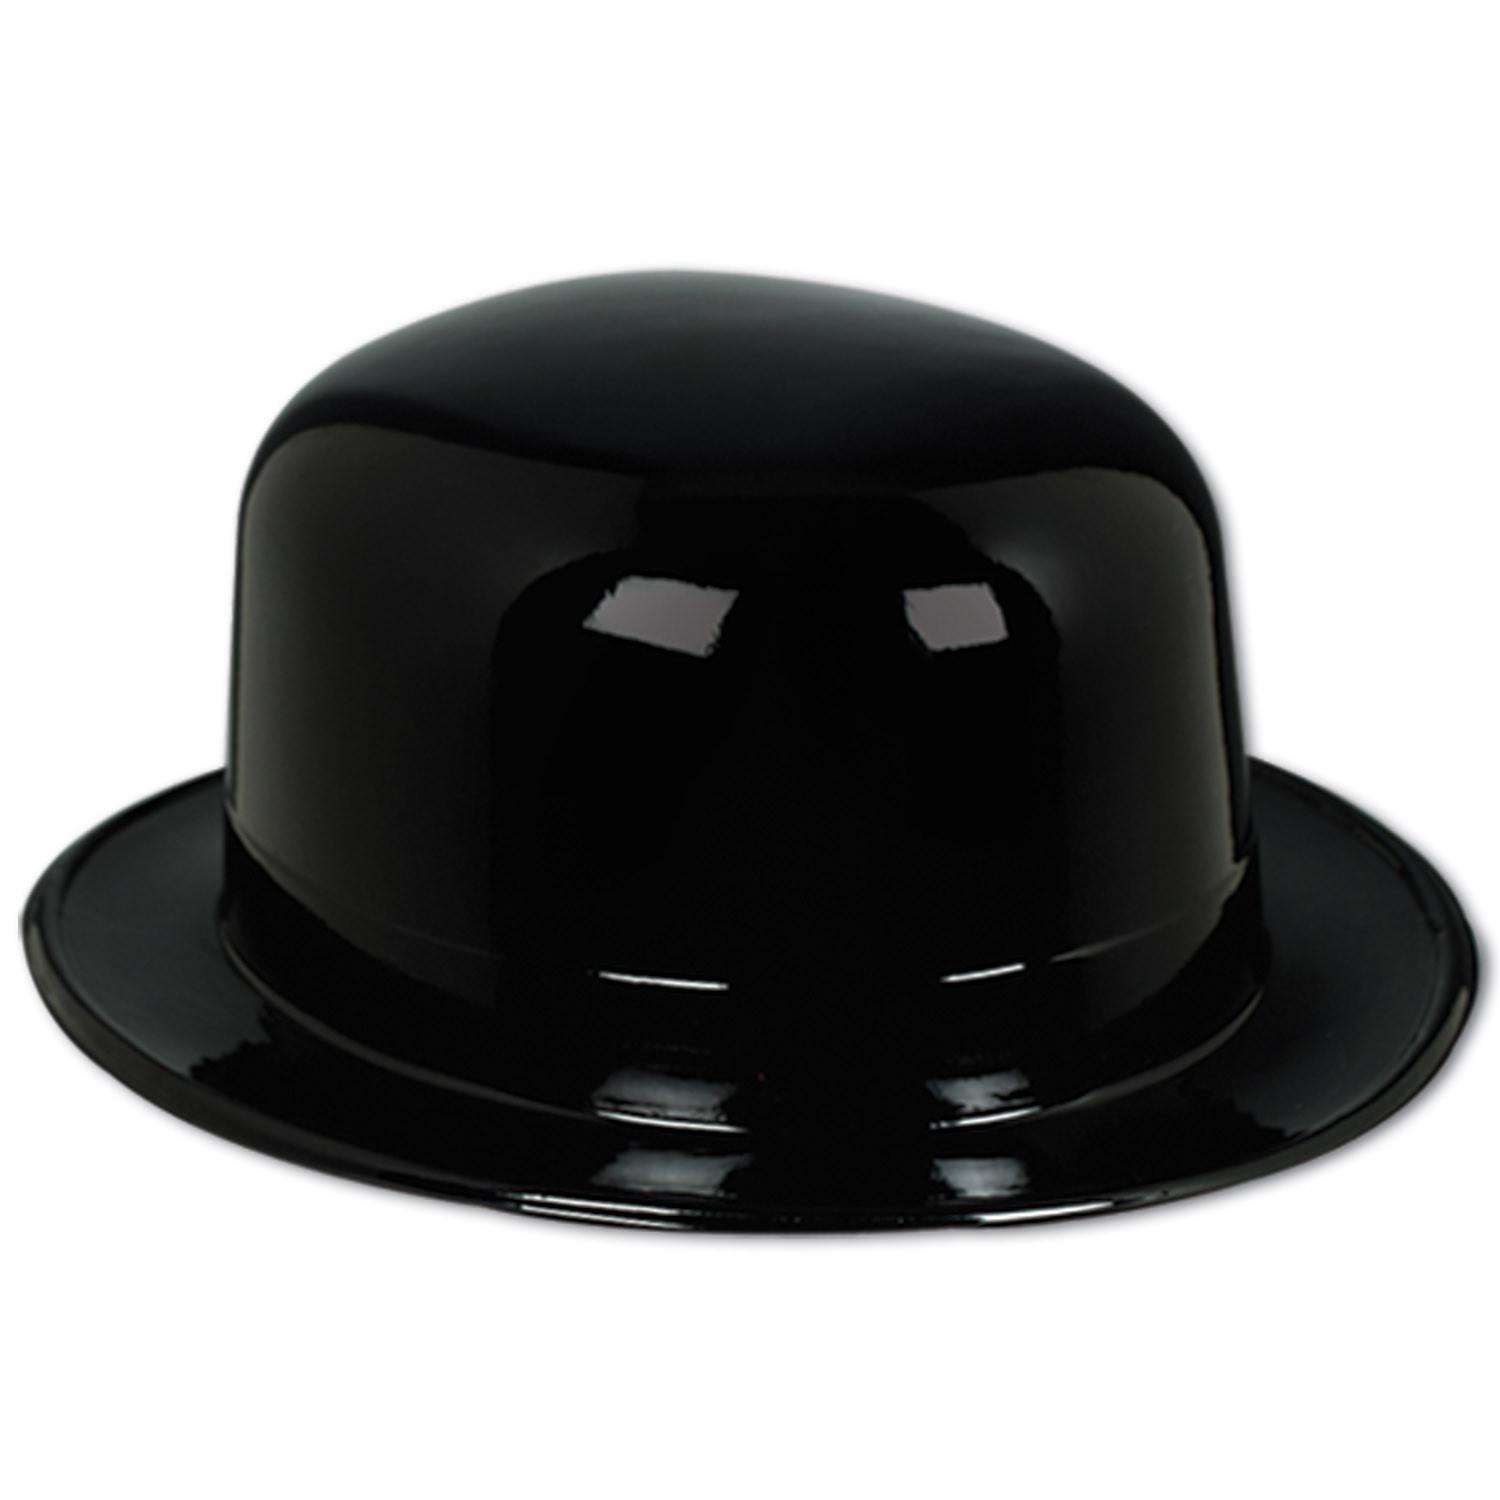 Plastic molded black material to make the perfect derby.